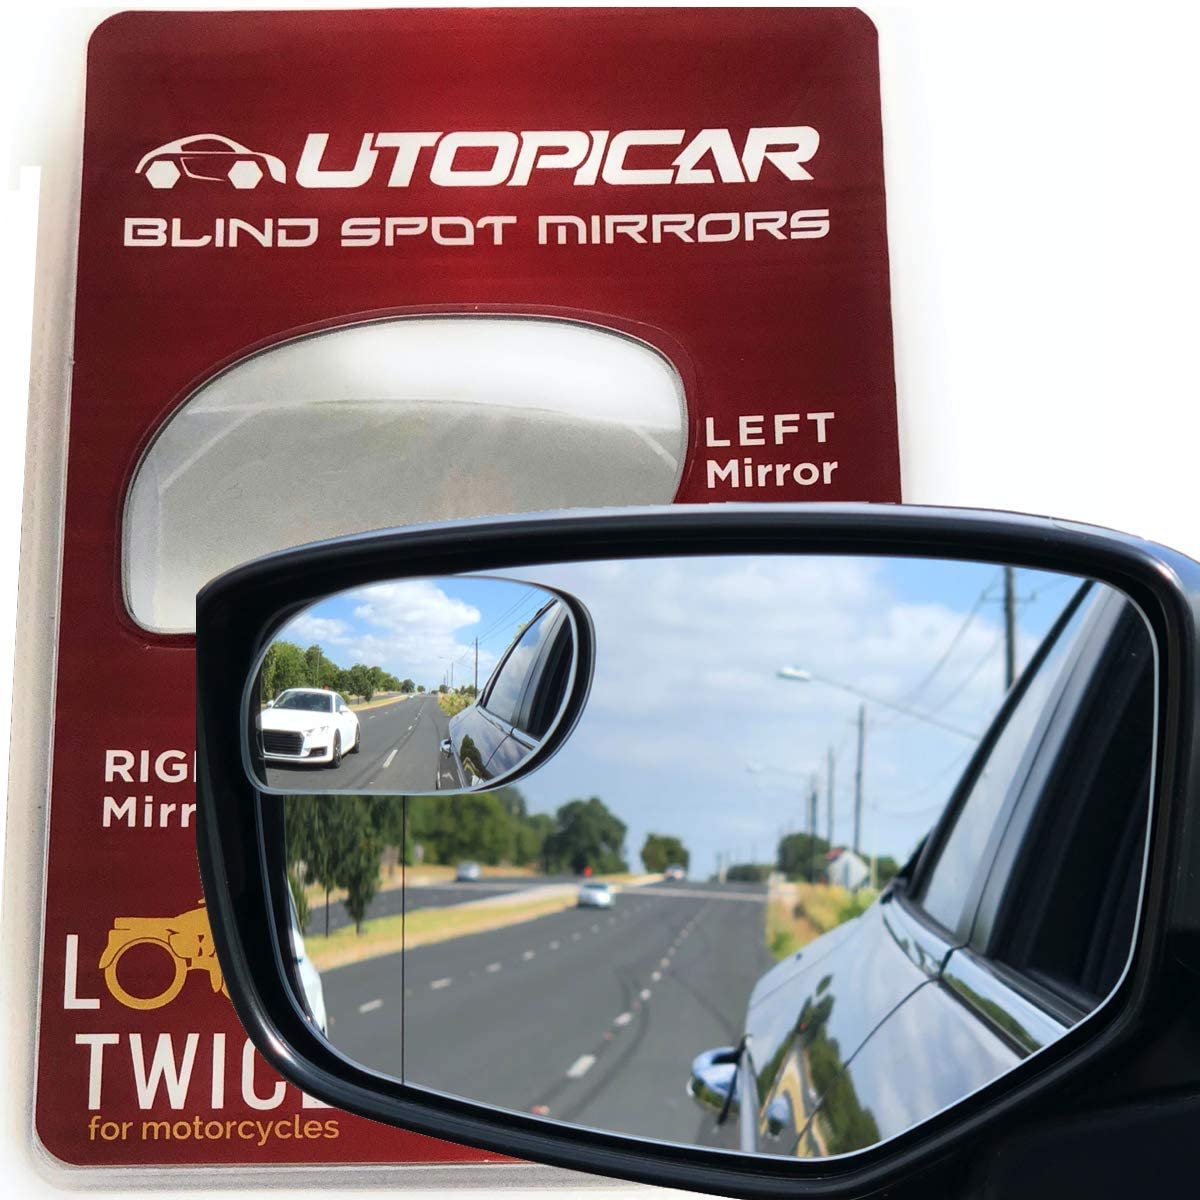 Buy Blind Spot Mirrors Long Design Car Mirror for Blindspot by Utopicar Car  Accessories | Automotive Rear View Door Mirrors | Stick-on mirror (2pack)  Online in South Korea. B01HEC3O0Y